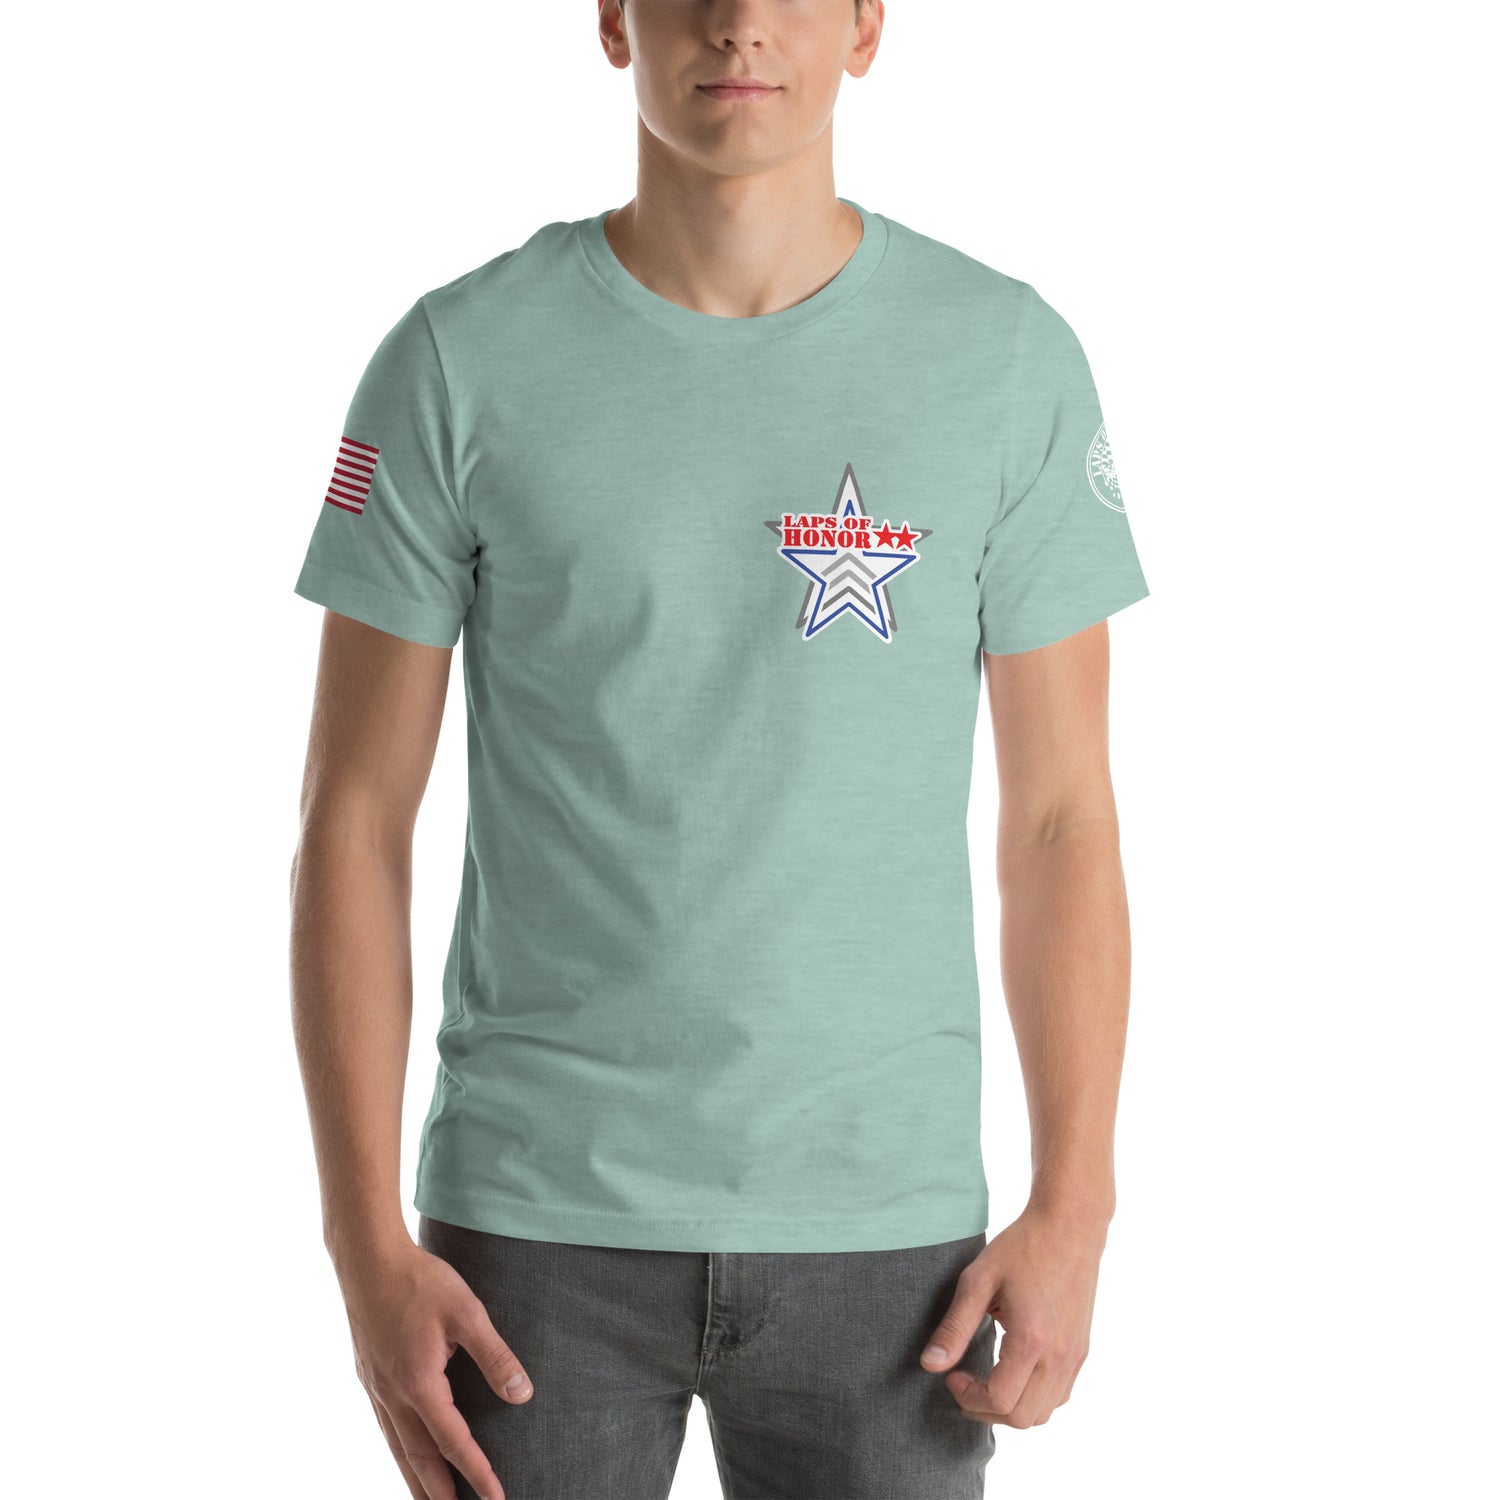 Laps of Honor Charity T-Shirt: Support US Veterans Corp with Style